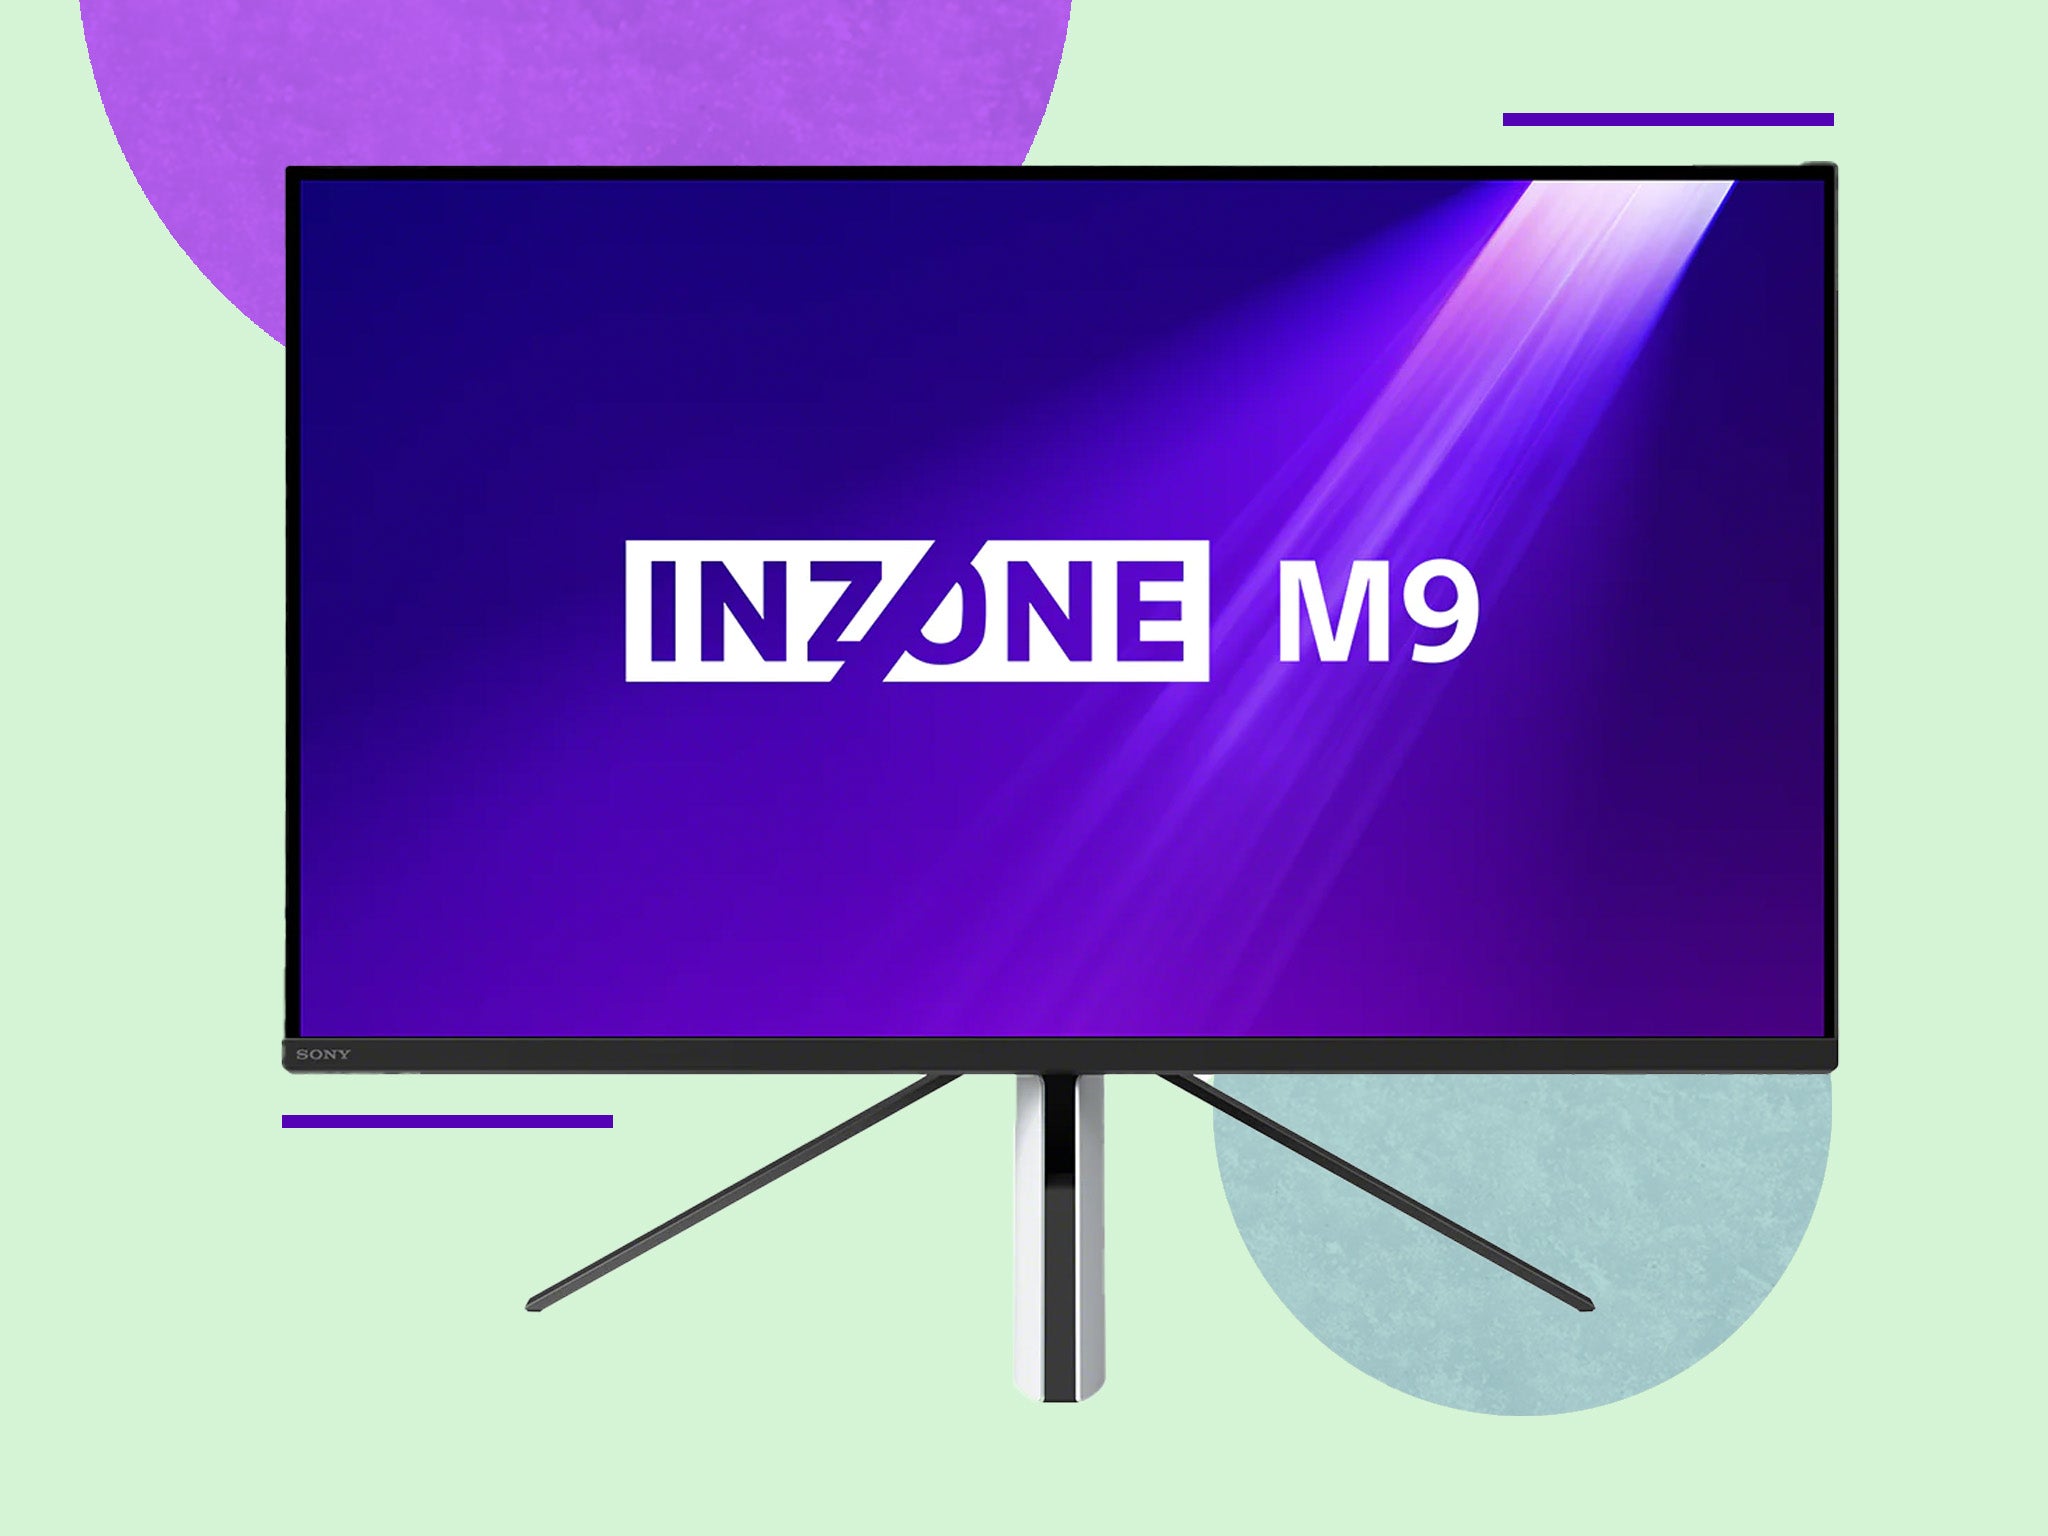 The Inzone M9 launches 18 August. Pre-orders are open now